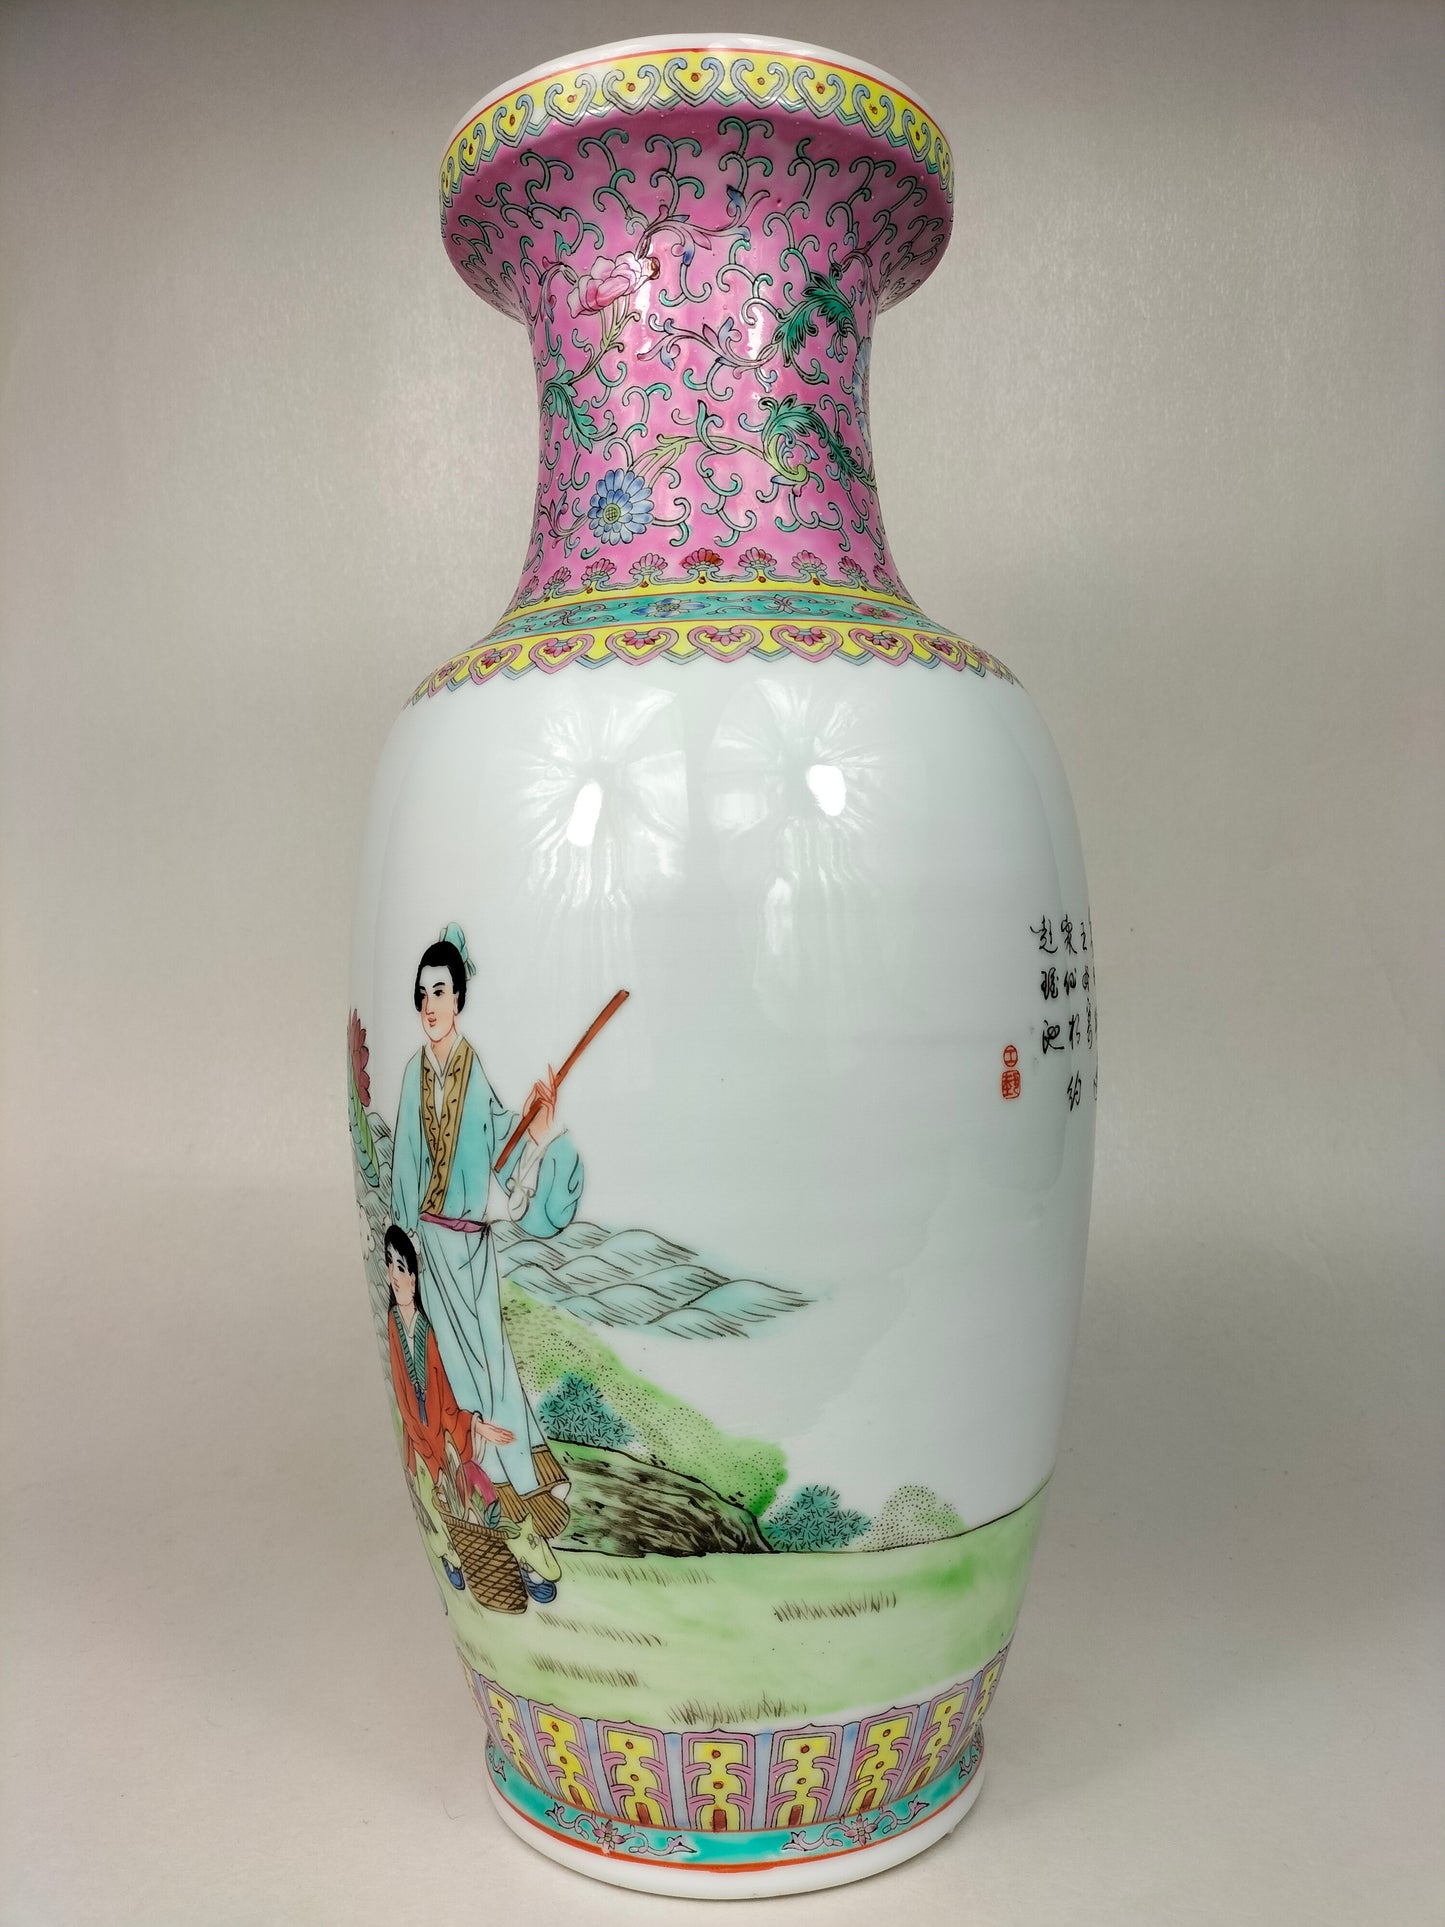 Chinese famille rose vase decorated with 8 immortals // Jingdezhen - 20th century